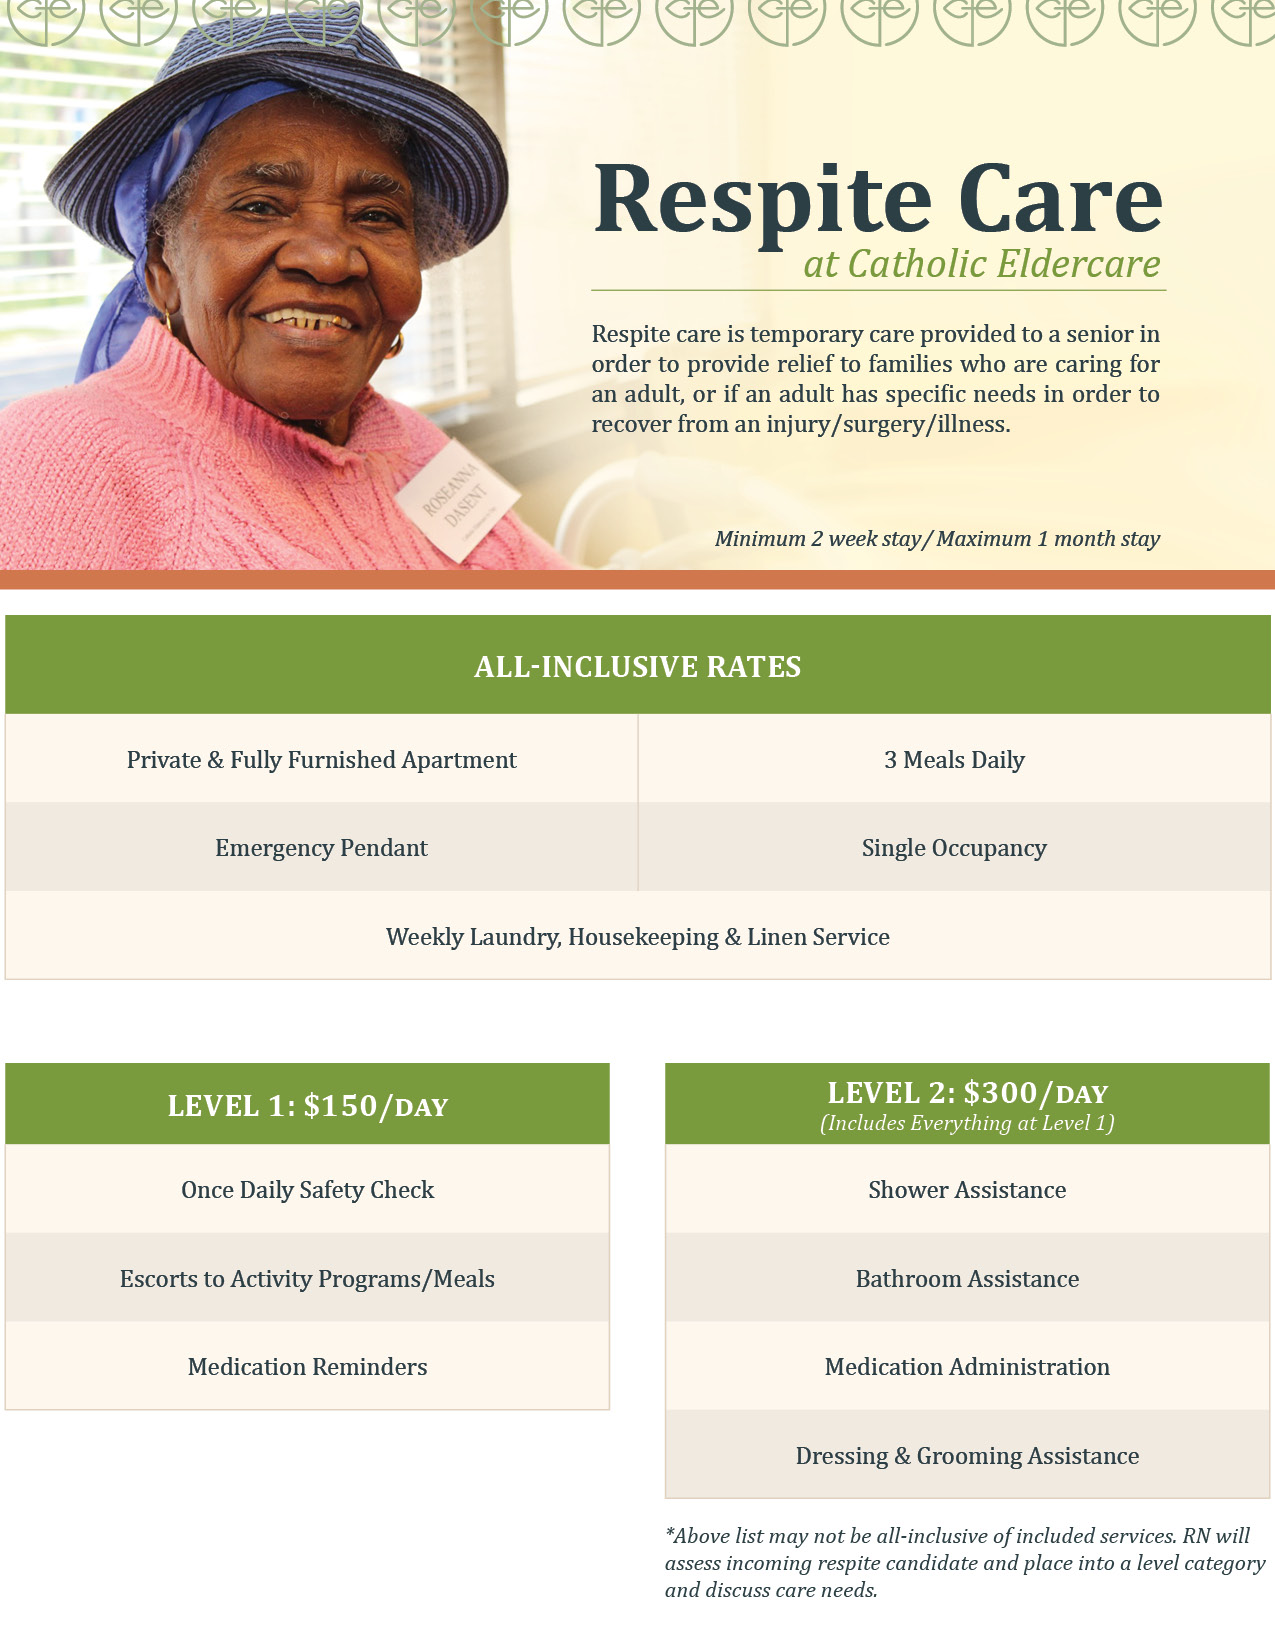 Respite Care at Catholic Eldercare Respite care is temporary care provided to a senior in order to provide relief to families who are caring for an adult, or if an adult has specific needs in order to recover from an injury/surgery/illness. 